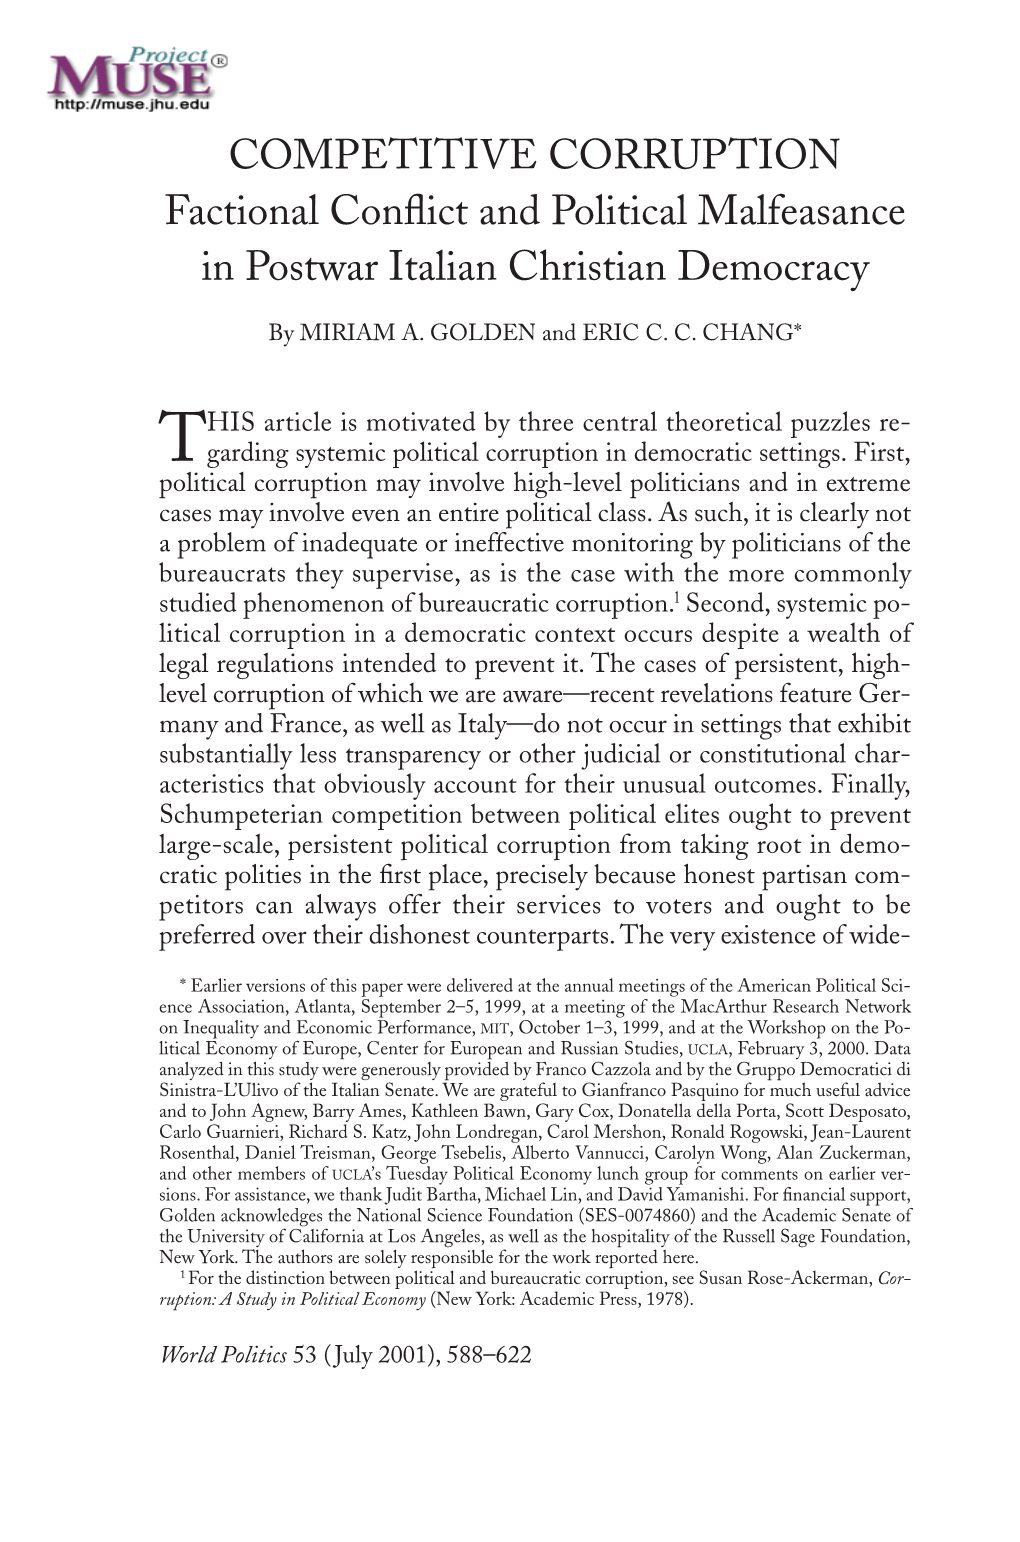 COMPETITIVE CORRUPTION Factional Conflict and Political Malfeasance in Postwar Italian Christian Democracy